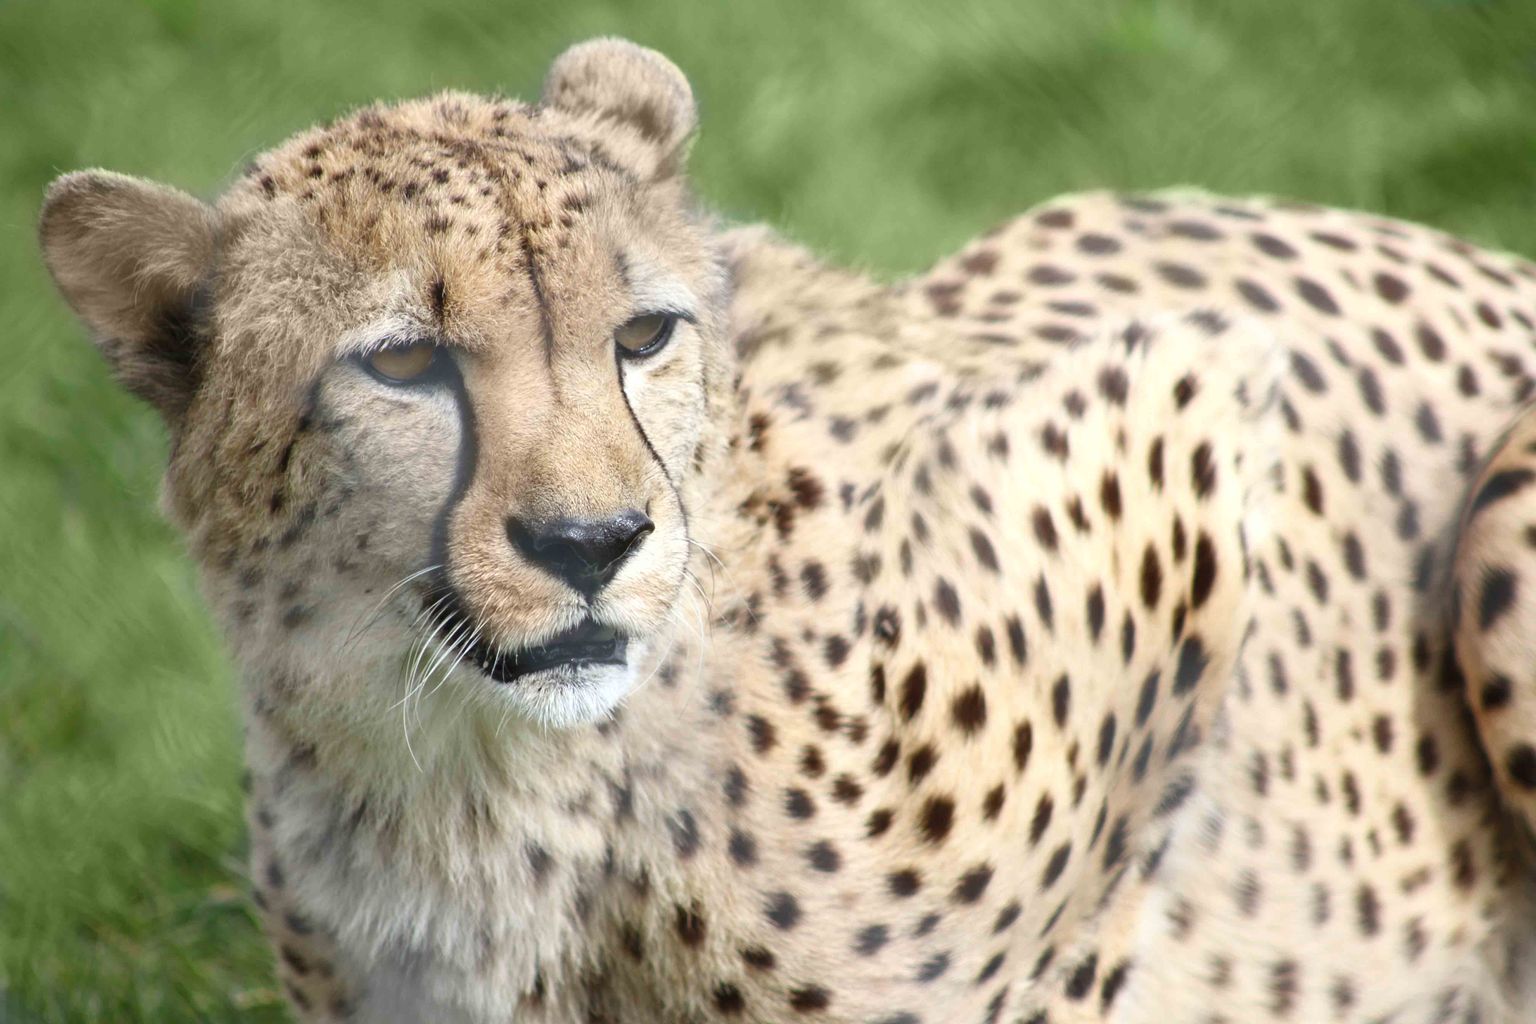 Cheetah enclosure getting upgraded thanks to donations